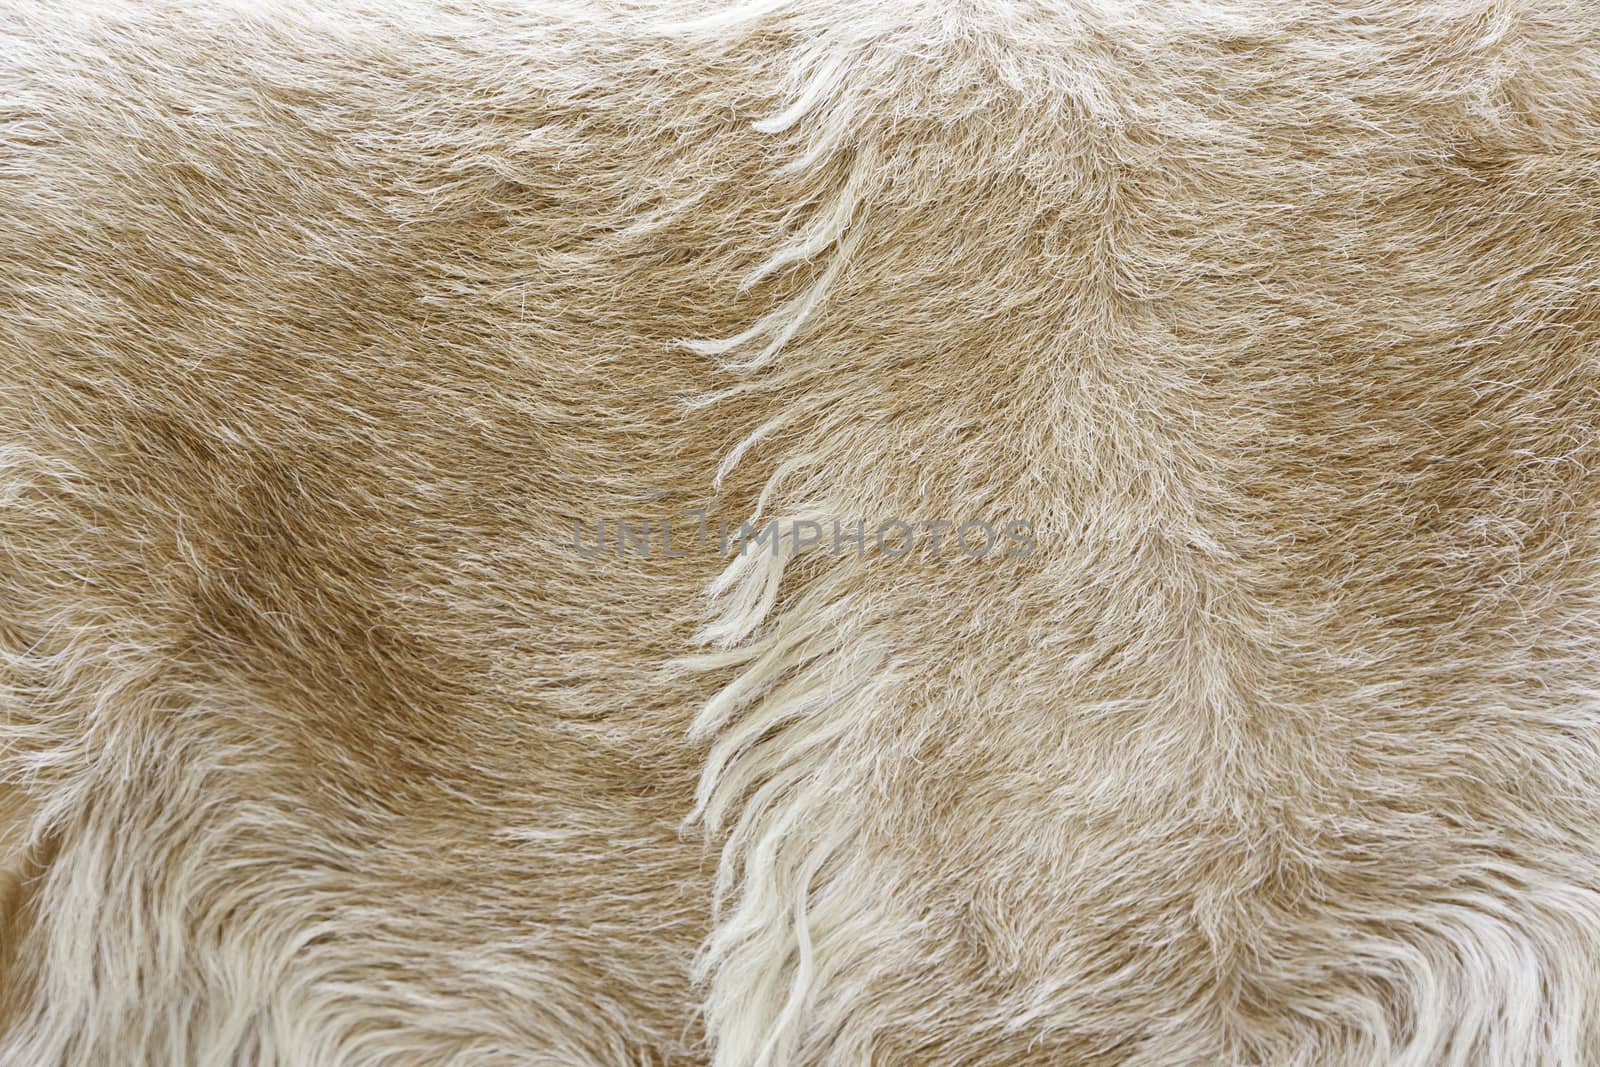 Animal skin with hair, background